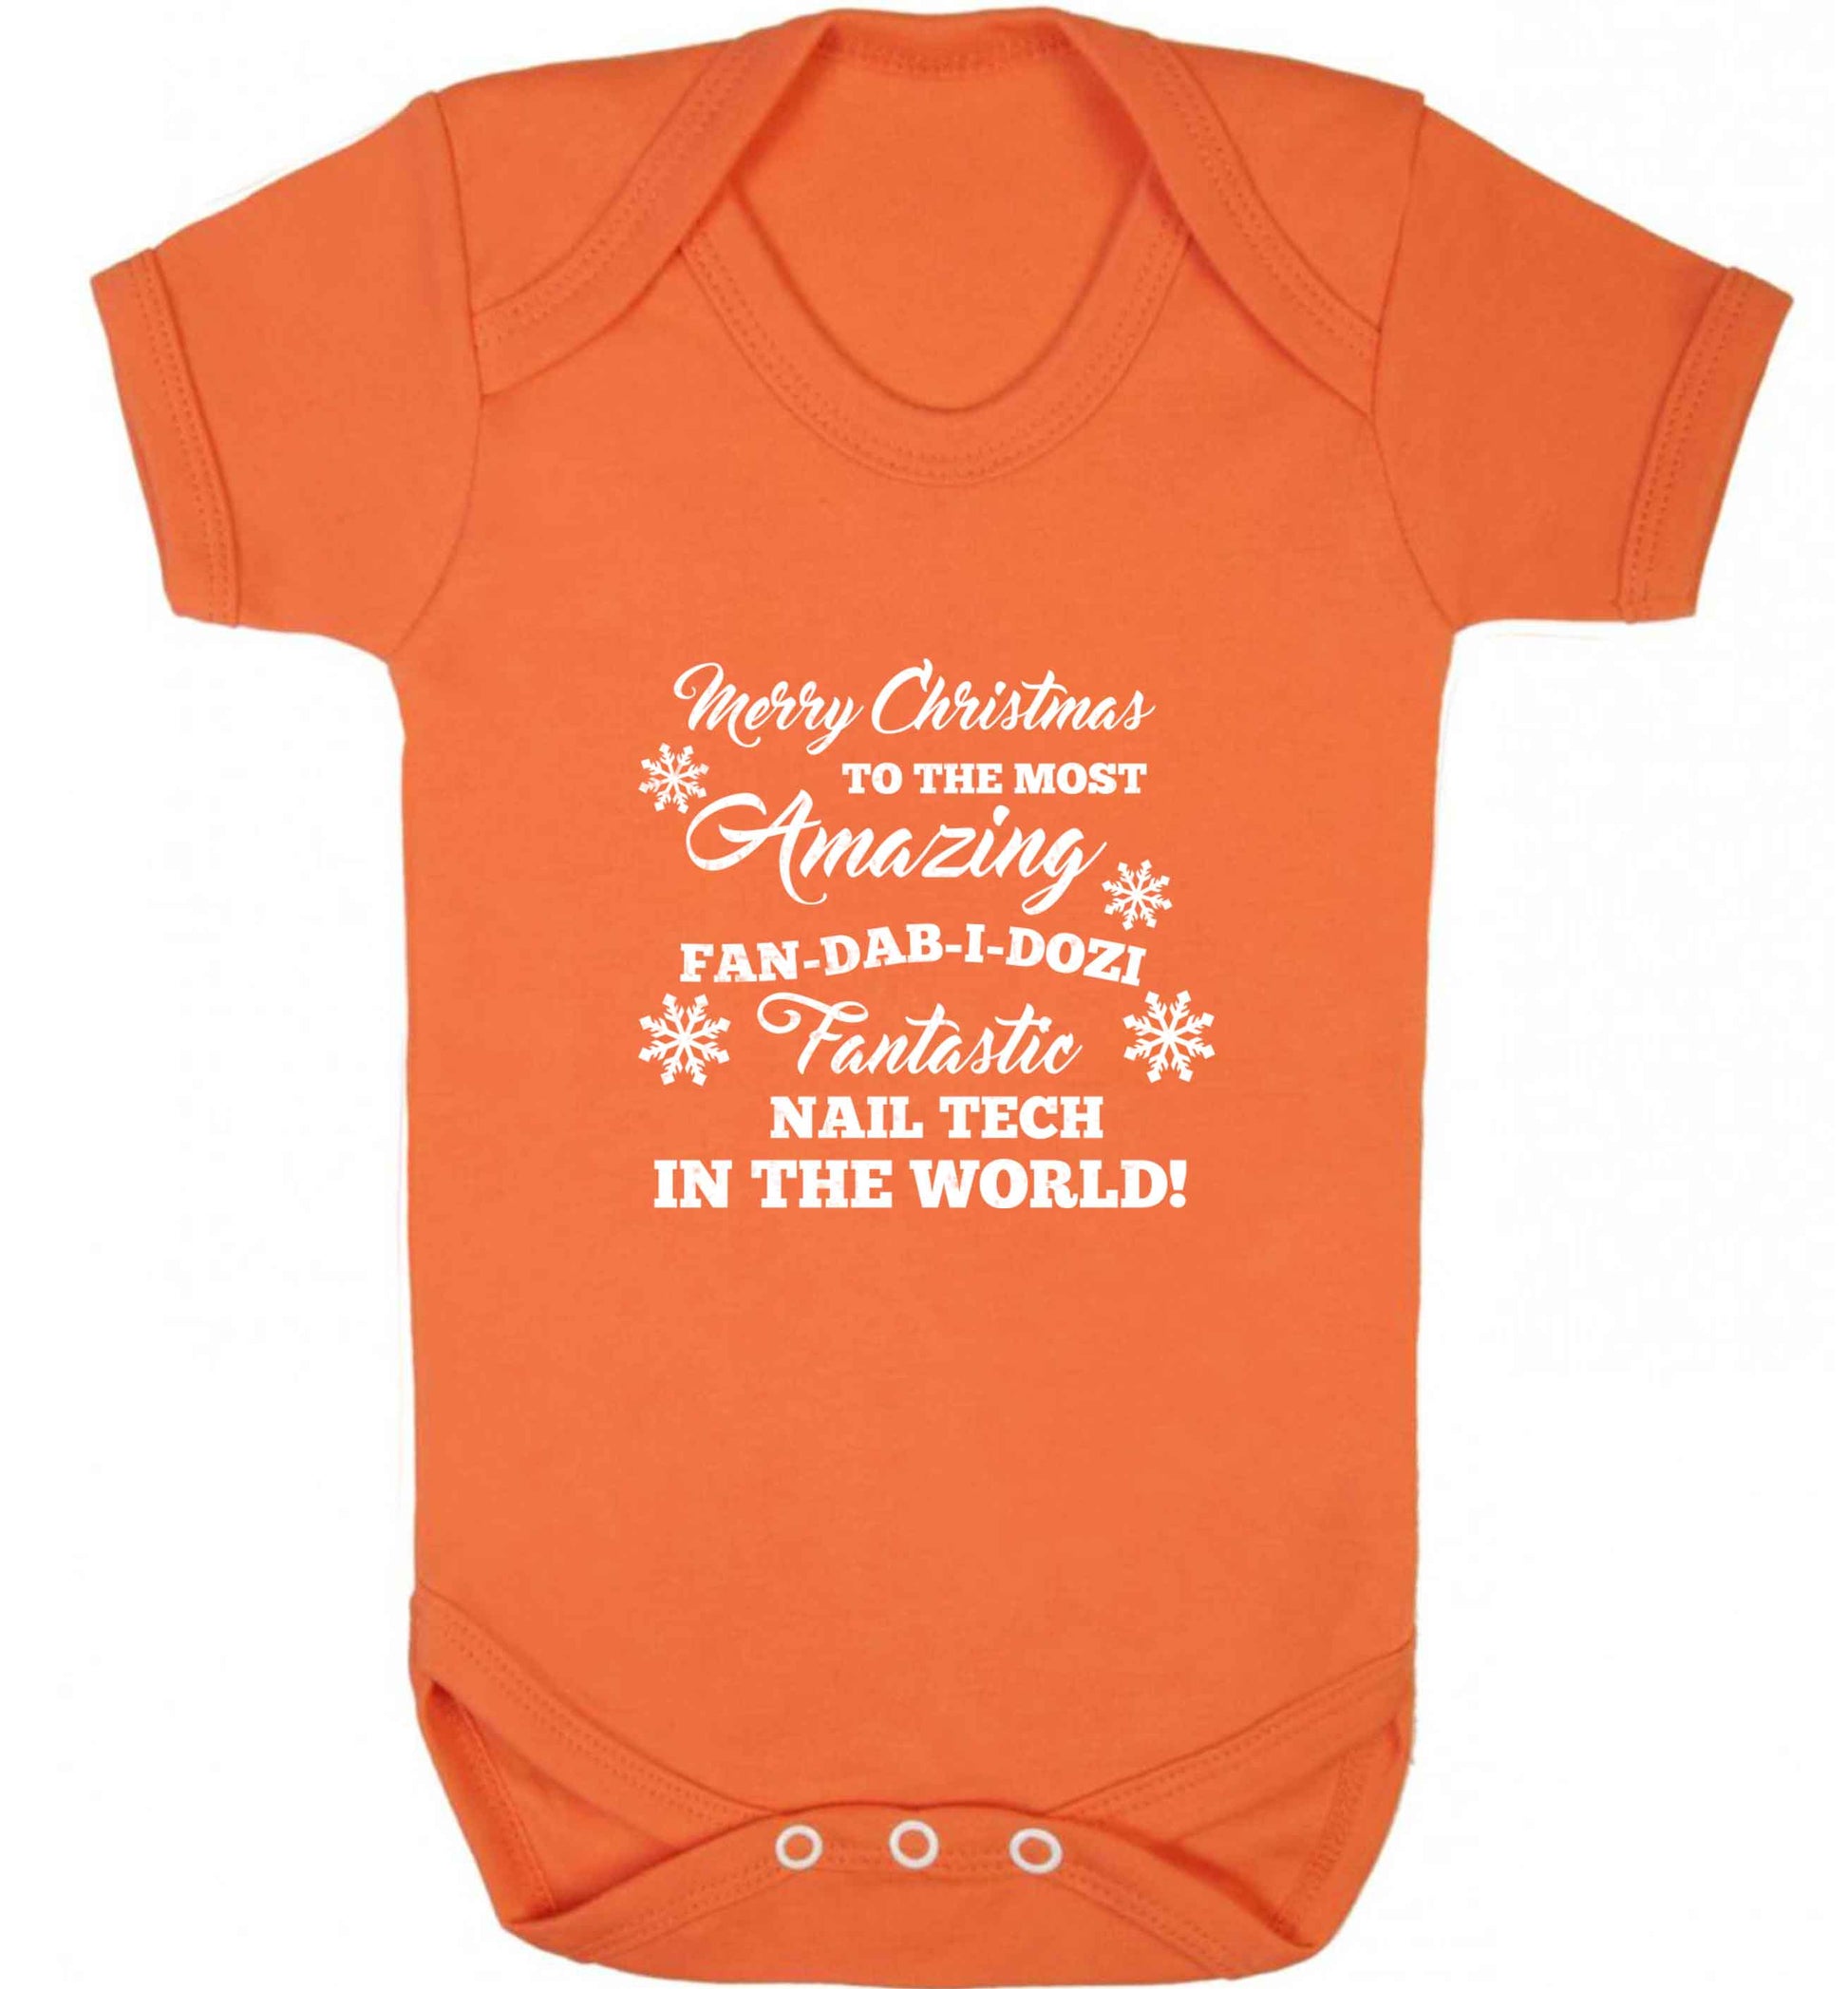 Merry Christmas to the most amazing fan-dab-i-dozi fantasic nail technician in the world baby vest orange 18-24 months